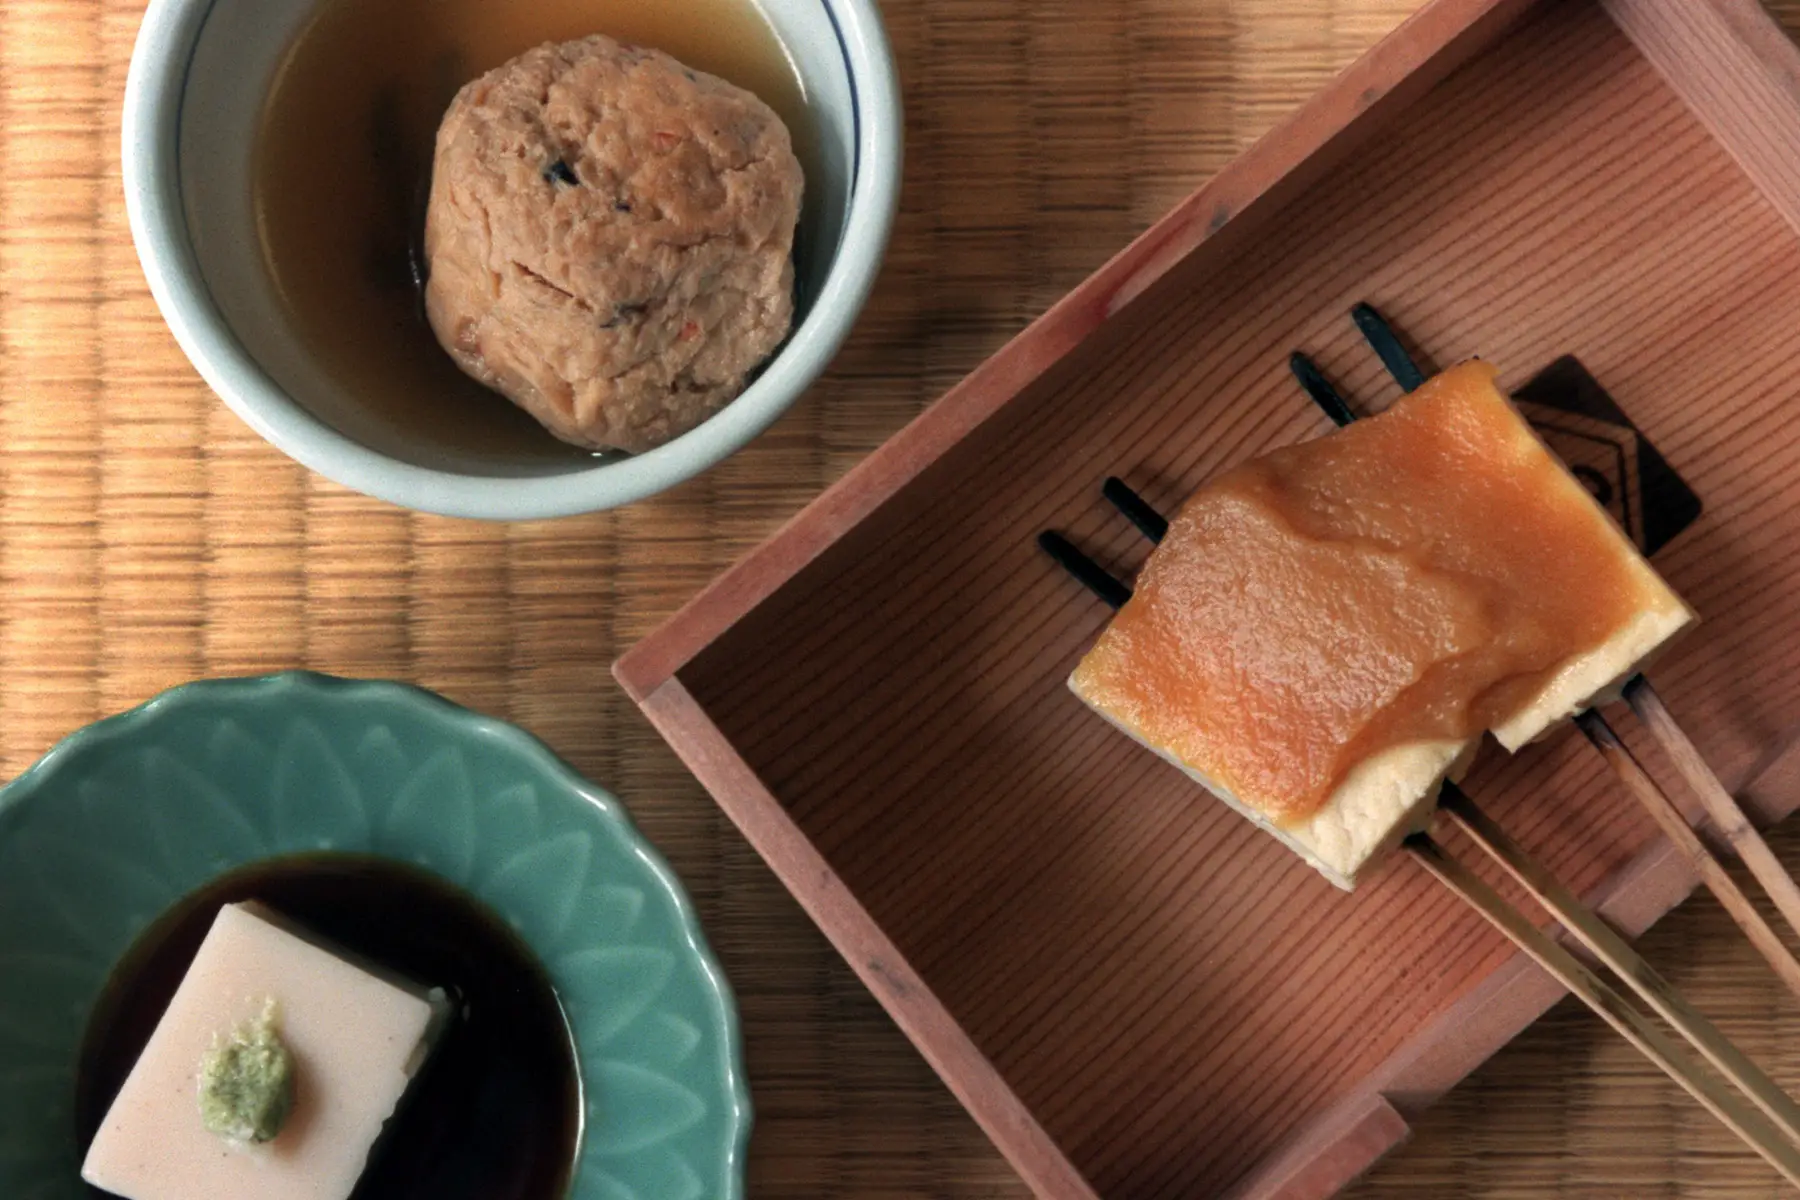 A selection of soy-based dishes: tofu dumpling, tofu, soy sauce, and tofu served on chopsticks with miso paste